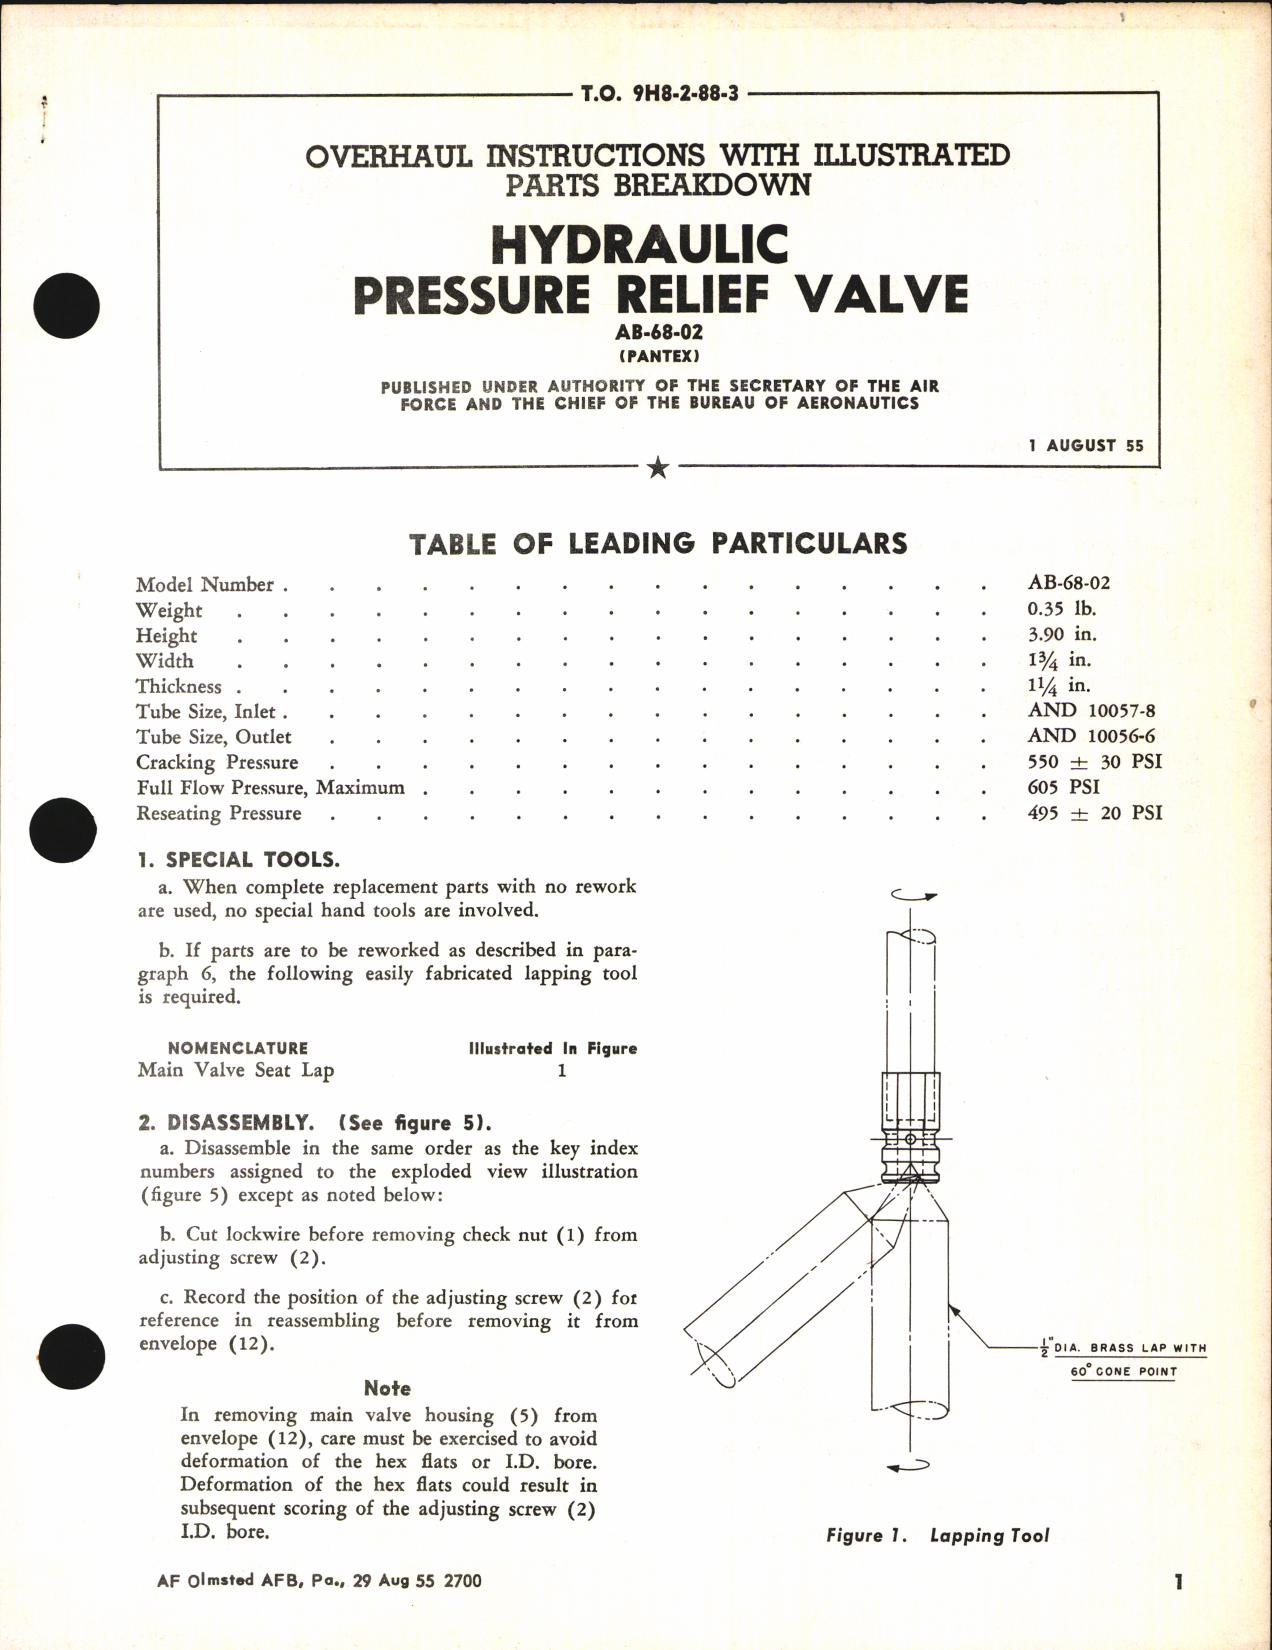 Sample page 1 from AirCorps Library document: Overhaul Instructions with Illustrated Parts Breakdown for Hydraulic Pressure Relief Valve AB-68-02